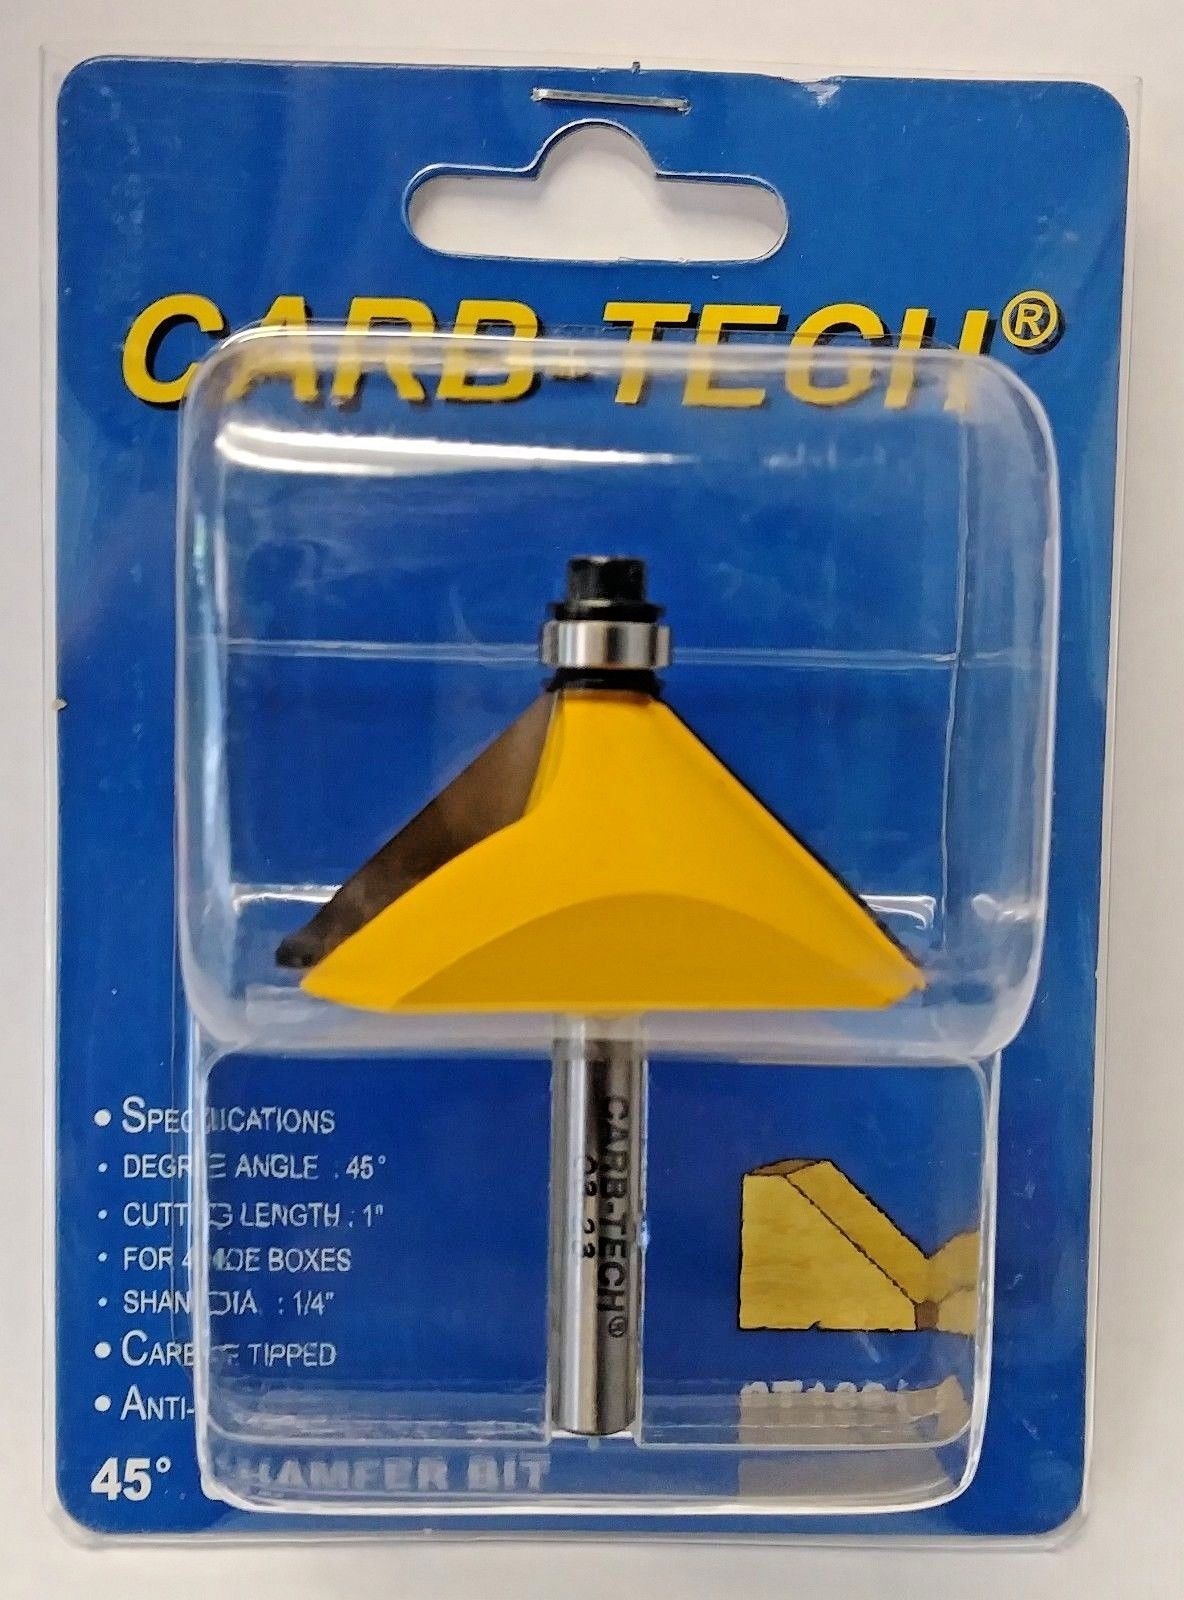 Carb Tech CT1204K Classical Molding Router Bit Carbide Tipped